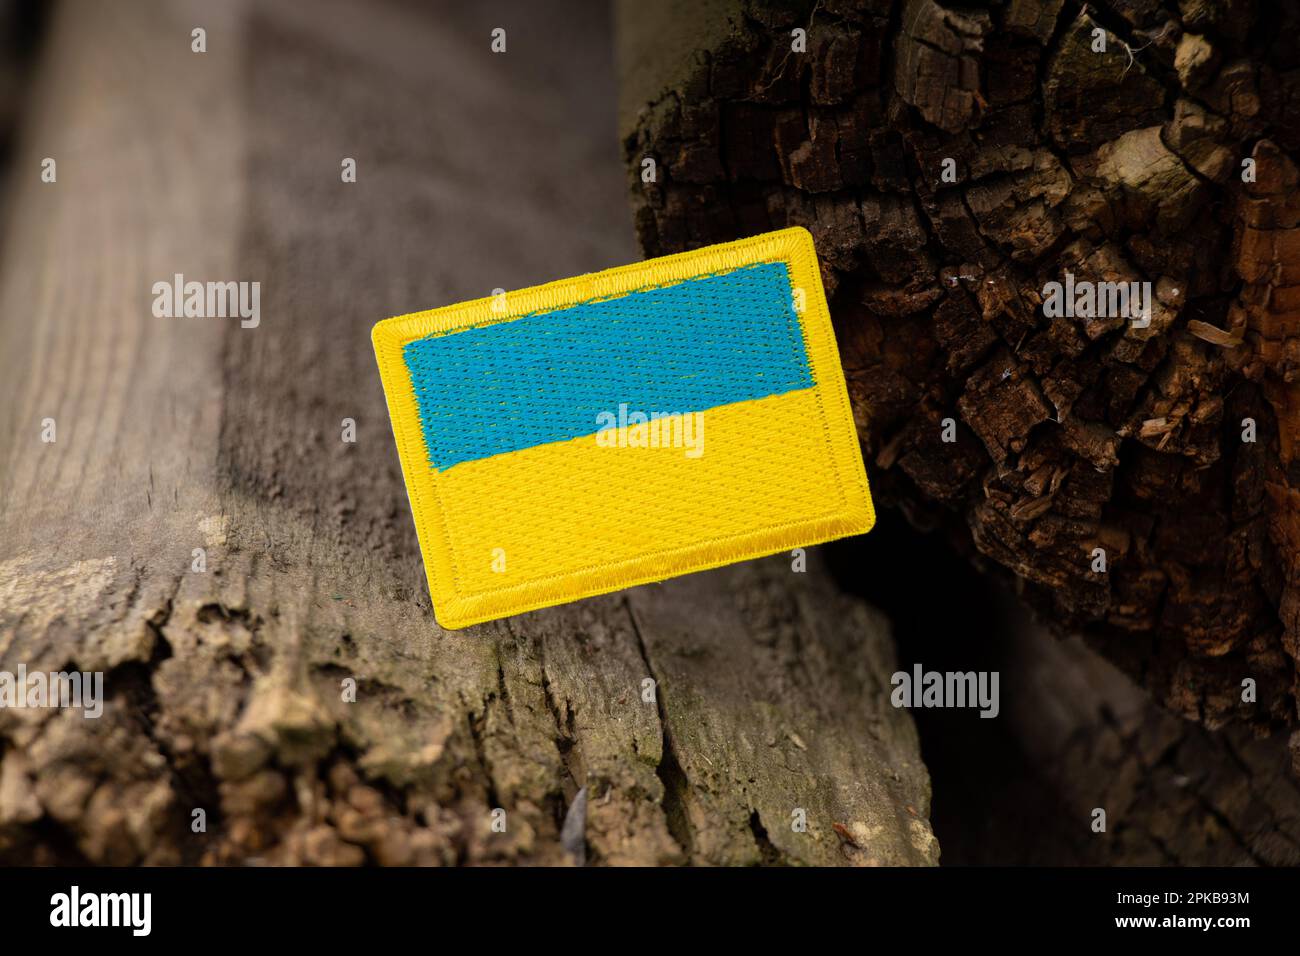 The flag of Ukraine lies on old wooden boards in the street close-up Stock Photo